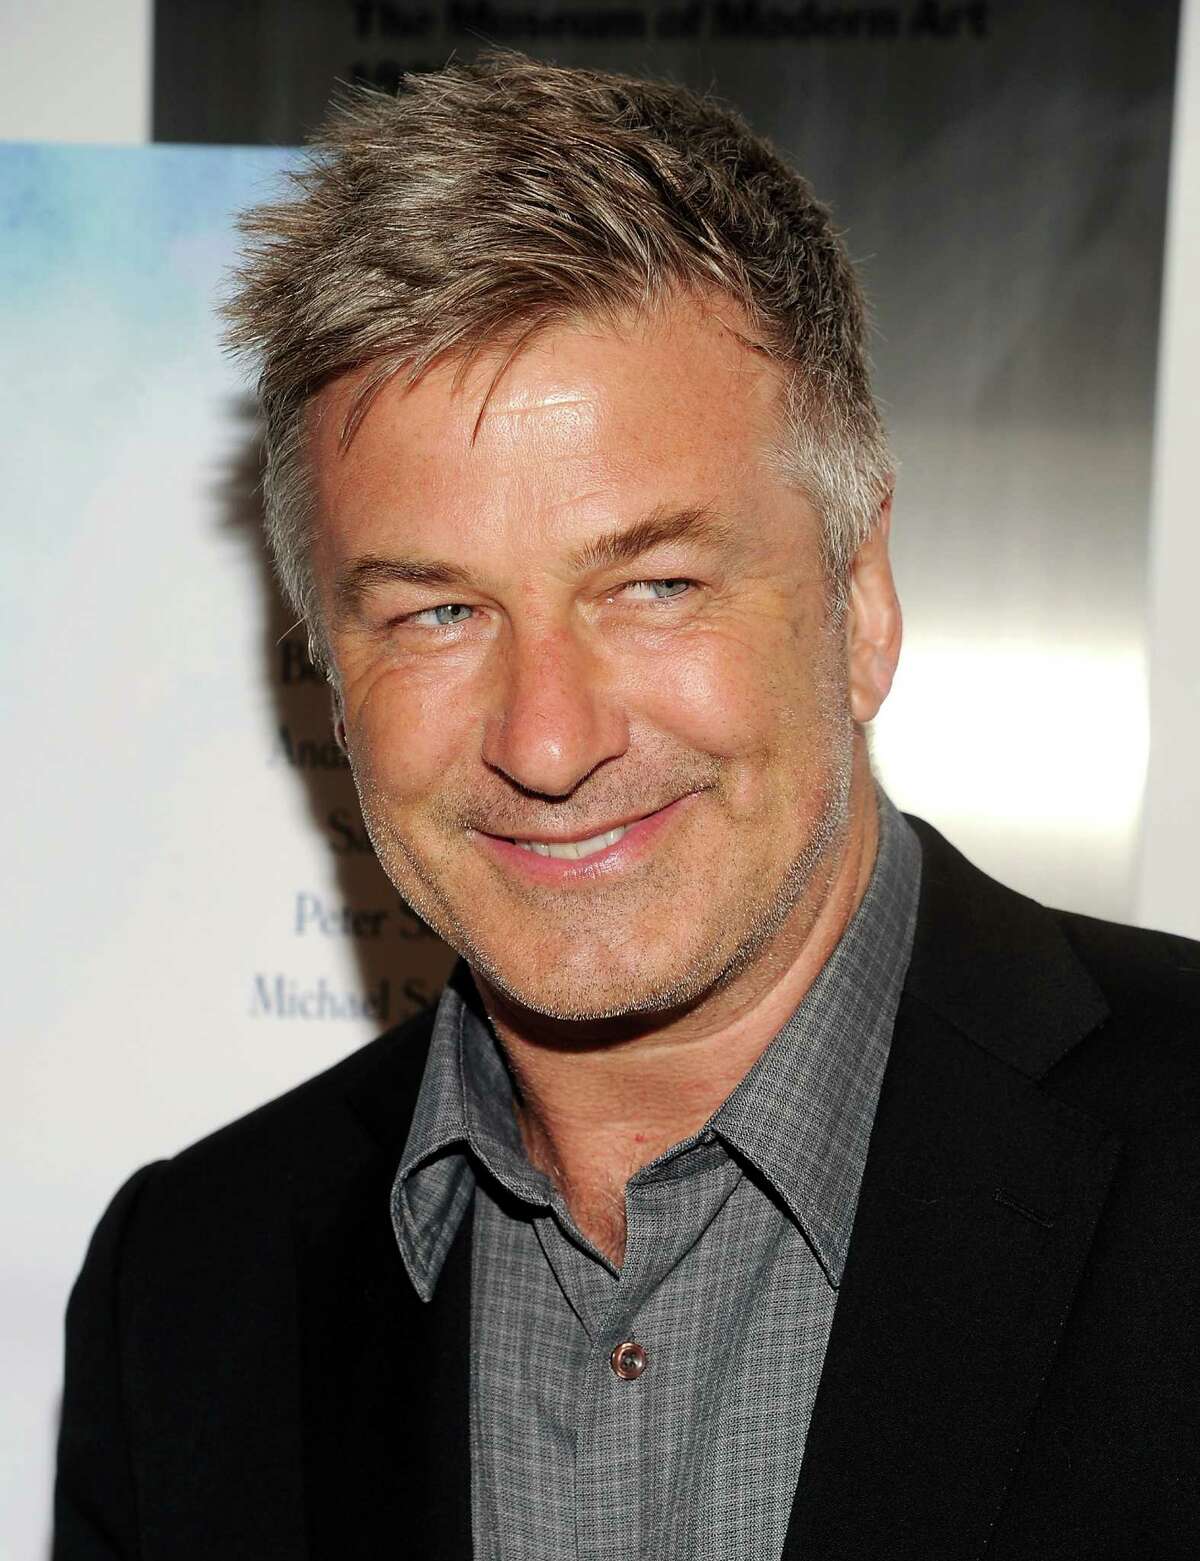 FILE - This July 22, 2013 file photo shows actor Alec Baldwin at the premiere of "Blue Jasmine" in New York. MSNBC announced Thursday Sept. 5, that Baldwin will join MSNBC as the host of a new weekly current events and culture talk show to air Fridays at 10 p.m. ET. ?Up Late w/Alec Baldwin? premiering in October. (Photo by Evan Agostini/Invision/AP, File)